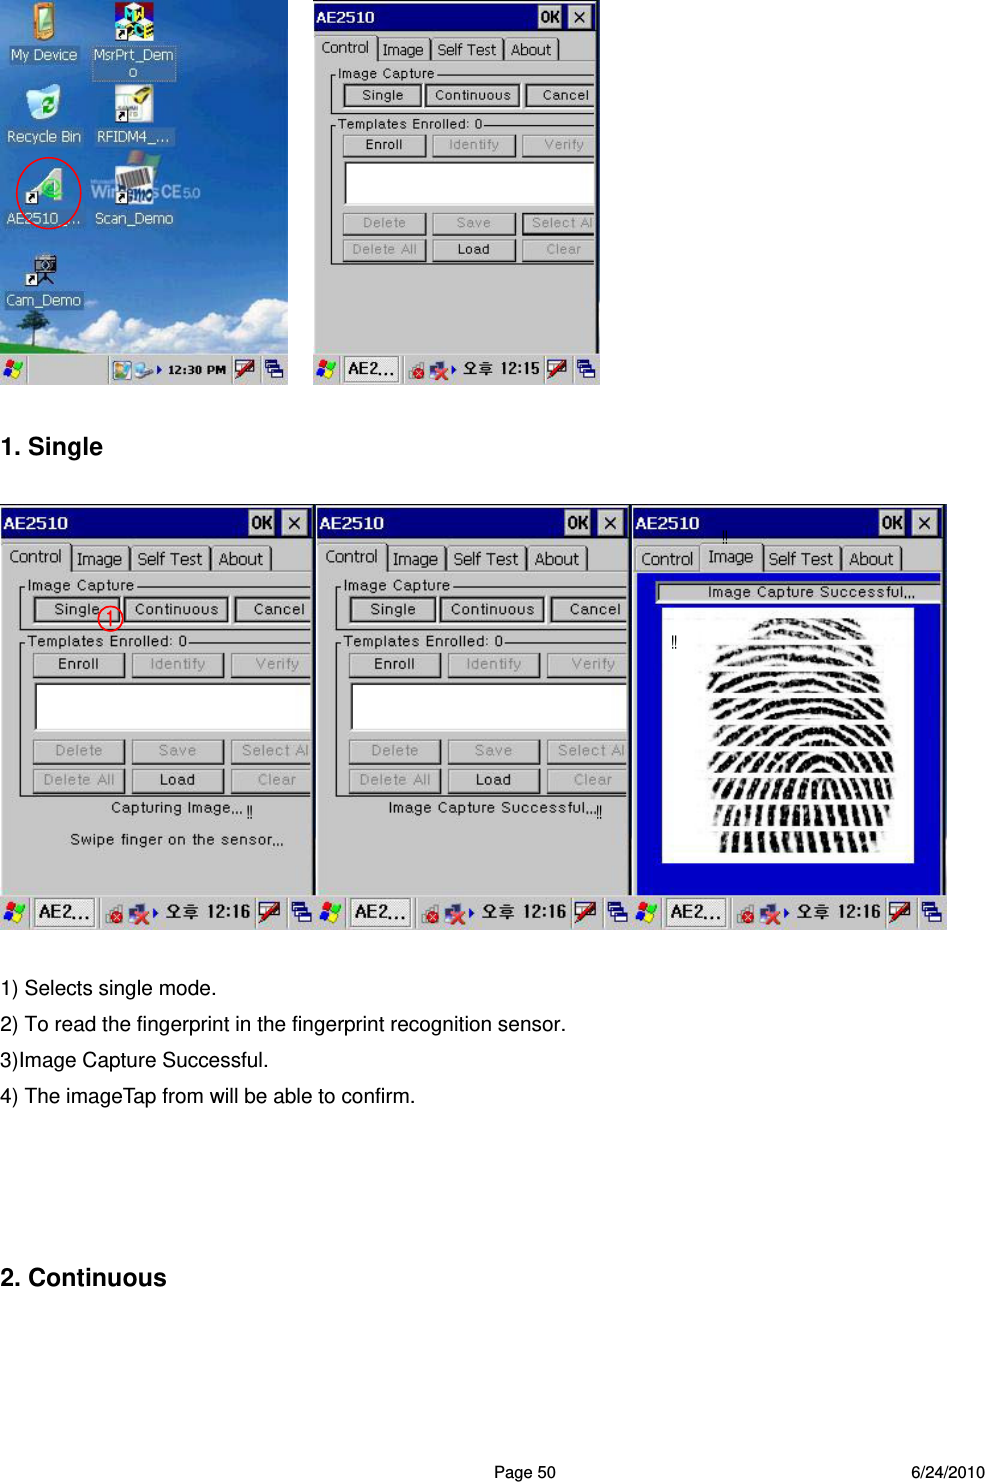  Page 50 6/24/2010      1. Single    1) Selects single mode. 2) To read the fingerprint in the fingerprint recognition sensor. 3)Image Capture Successful. 4) The imageTap from will be able to confirm.     2. Continuous  ○1     